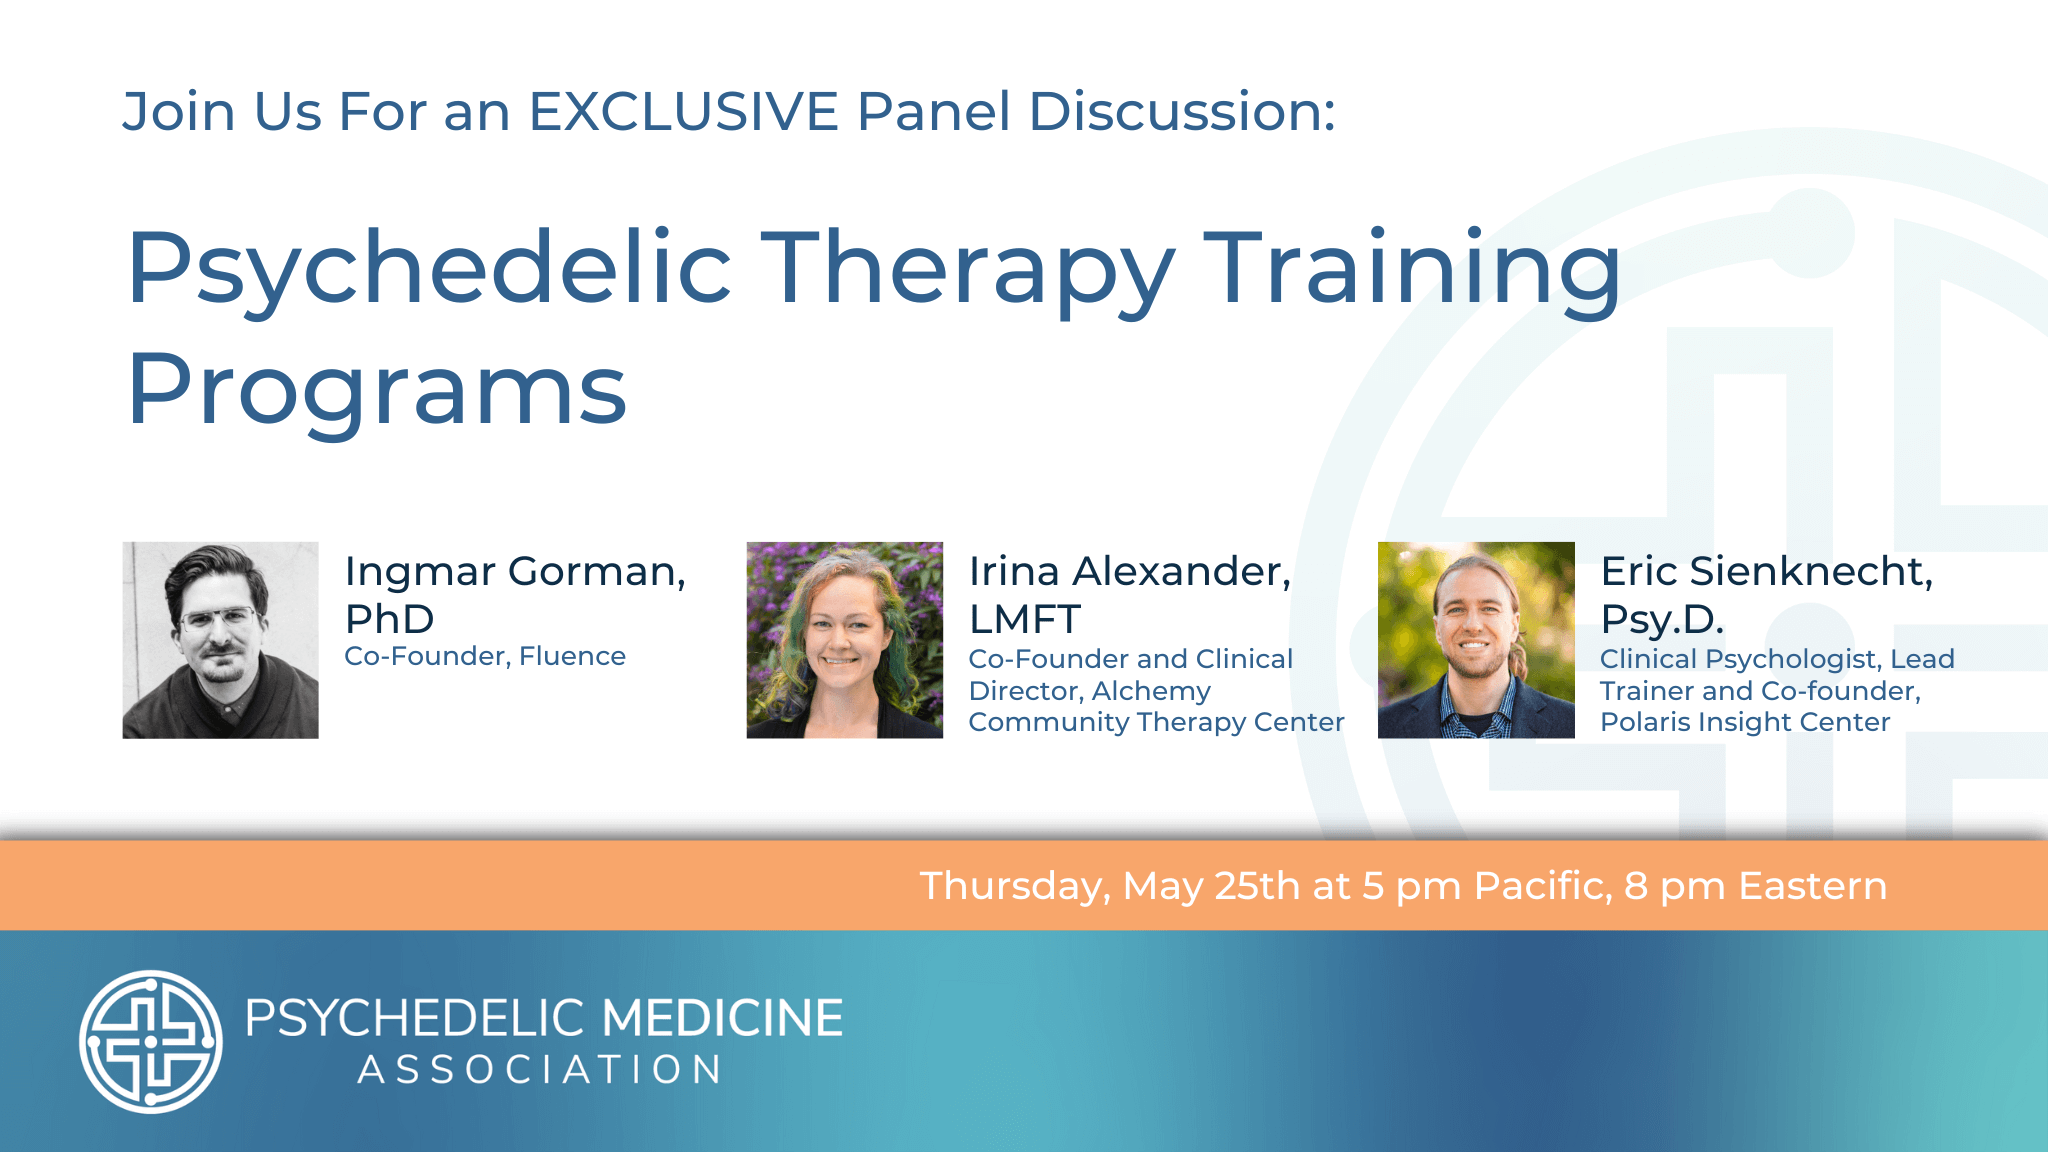 Psychedelic Therapy Training Programs exclusive webinar for members of the Psychedelic Medicine Association with Ingmar Gorman, PhD, Irina Alexander, LMFT, and Eric Sienknecht, Psy.D.